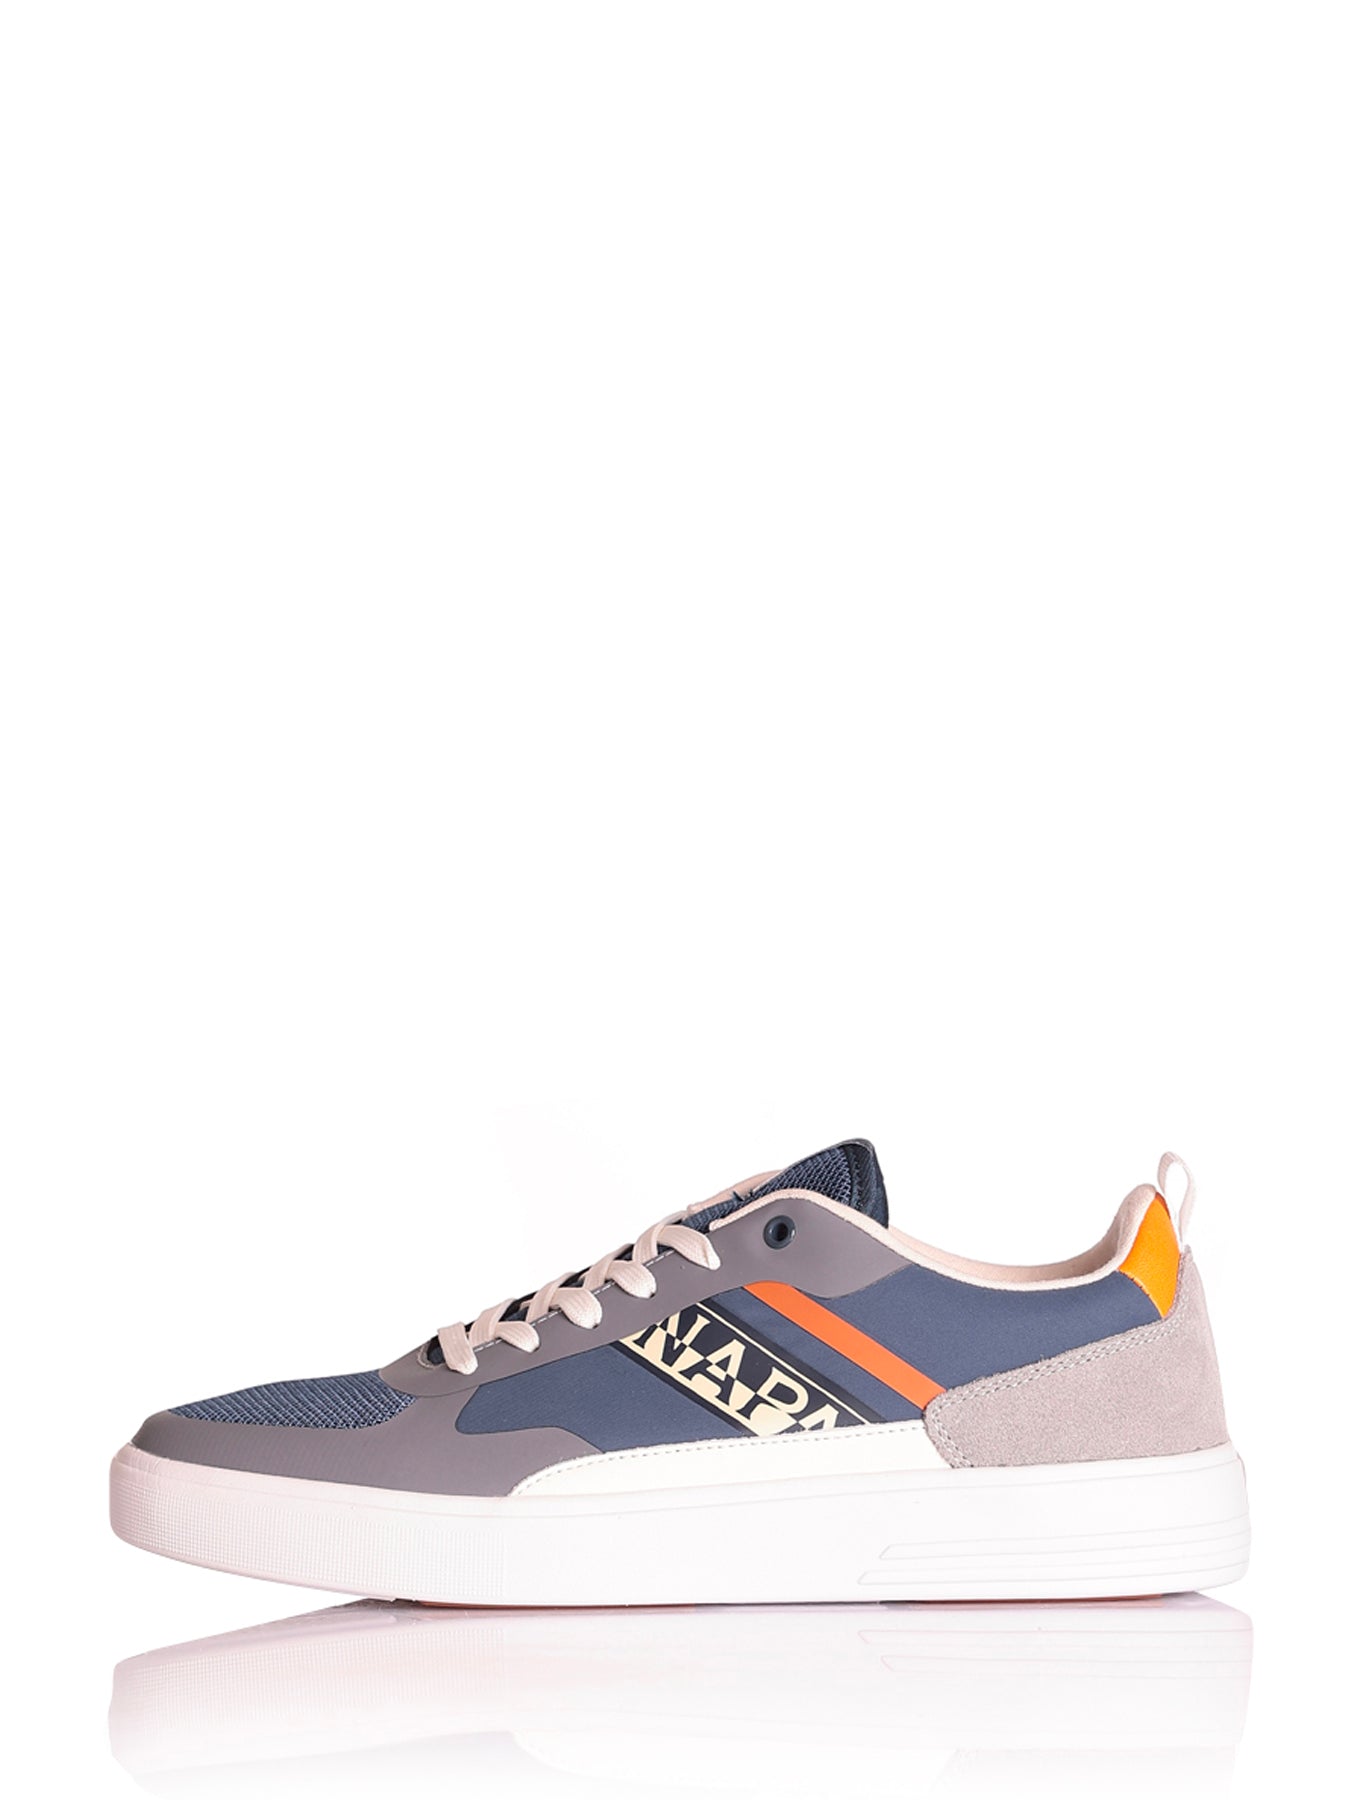 Paper Sneakers Np0a4hkr Navy/grey